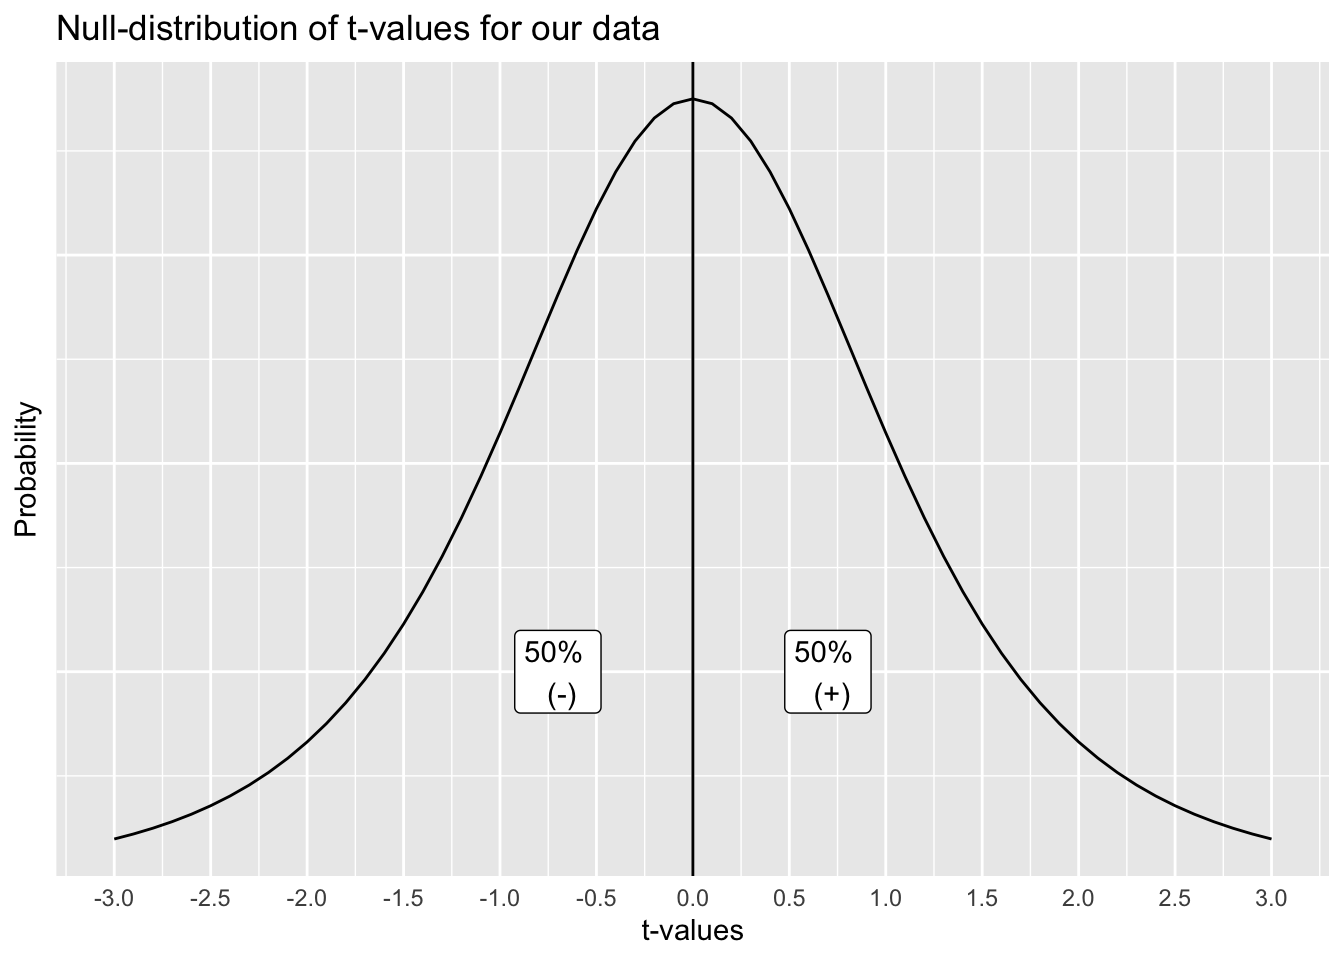 A distribution of t-values that can occur by chance alone, when there is no difference between the sample and a population